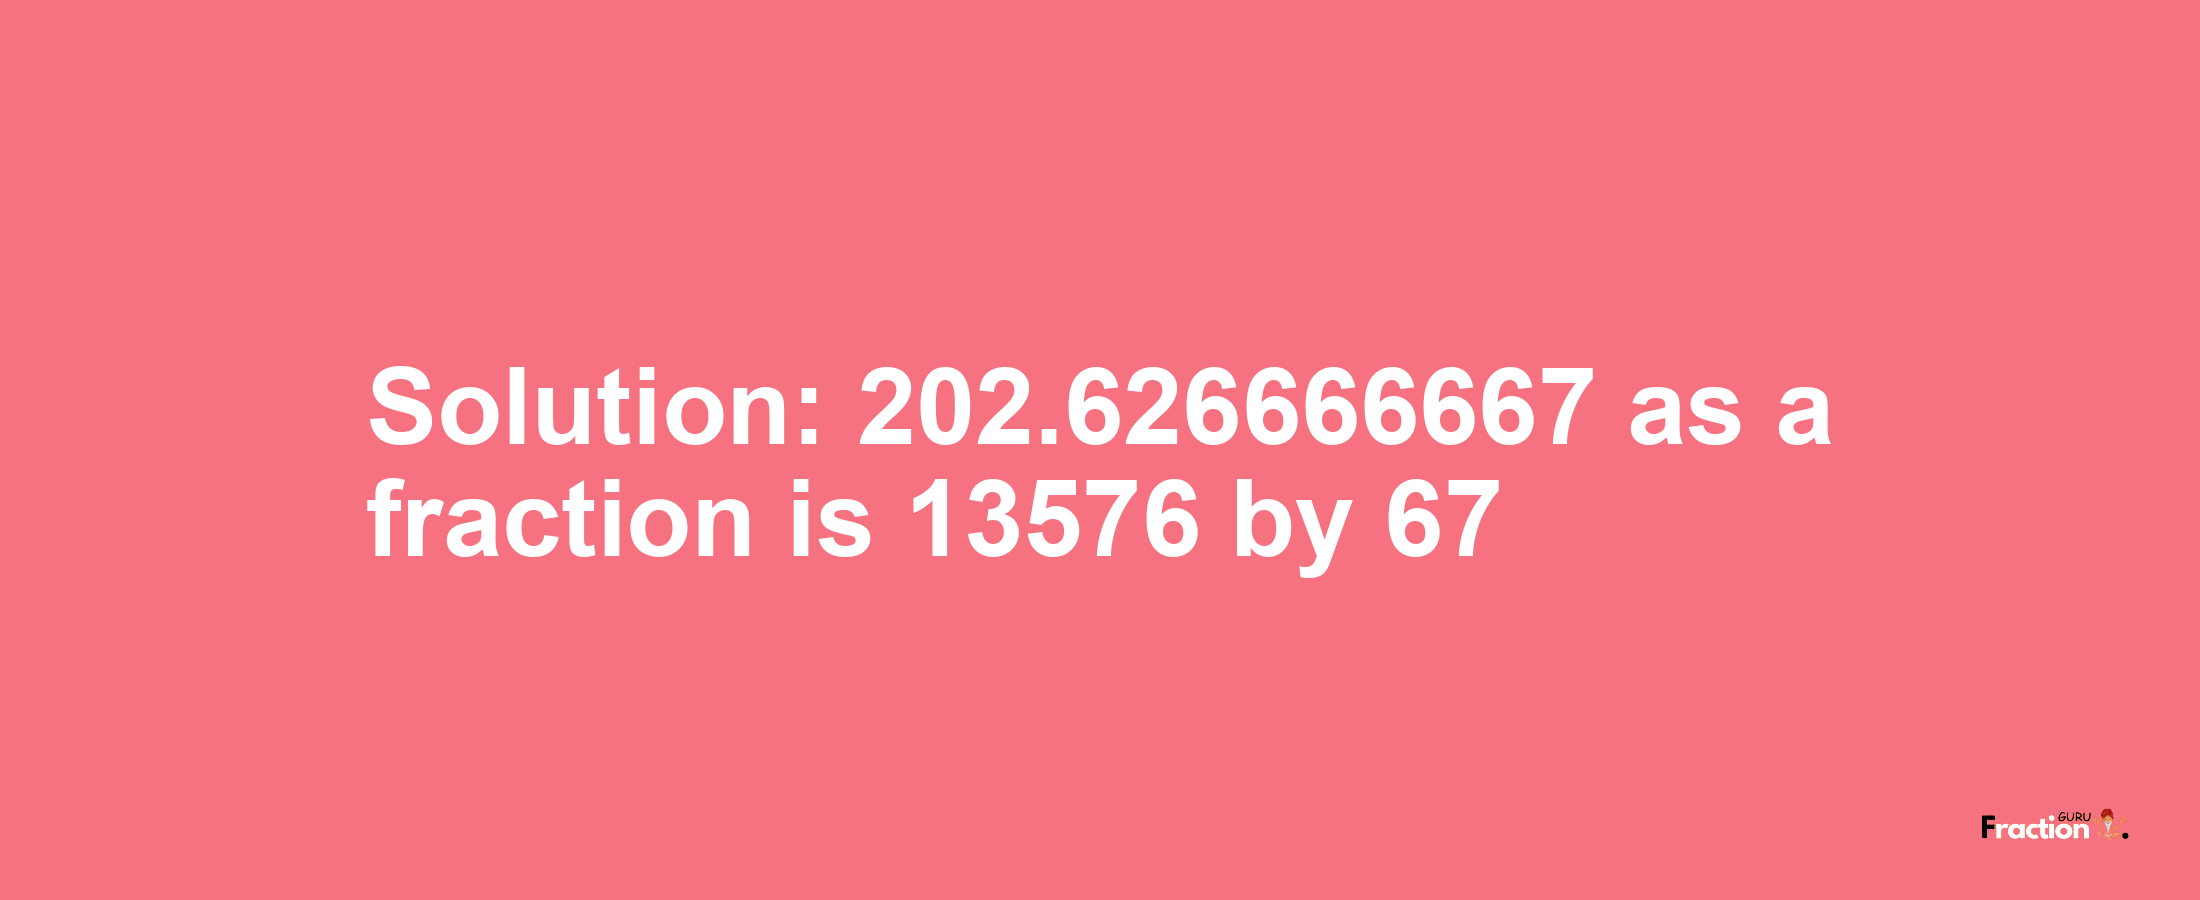 Solution:202.626666667 as a fraction is 13576/67